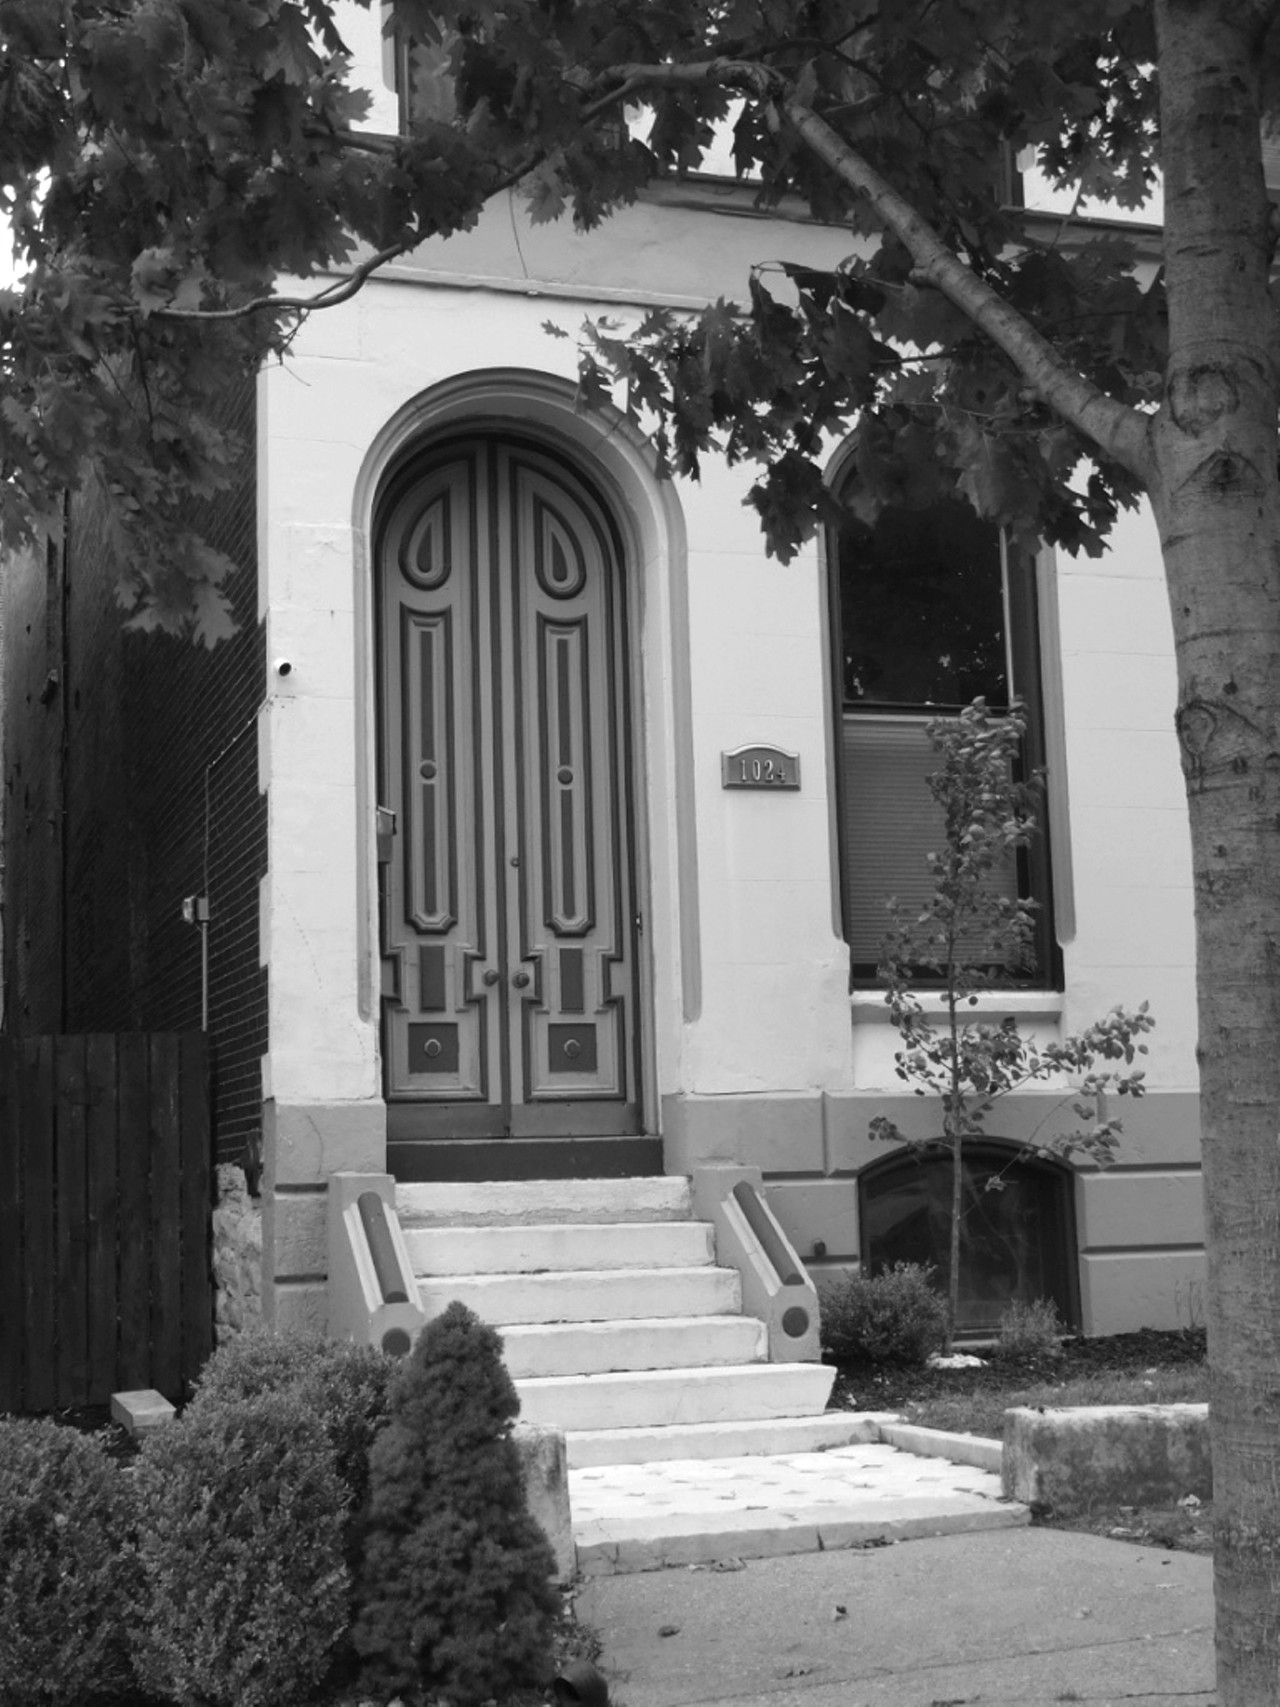 This Used to Be: Brewer Joseph Schnaider's townhouse turned Albanian Orthodox Church
Now It's: A private residence
Location: Lafayette Square
"Joseph Schnaider built this town house, along with others in the vacinity, in 1879," Harris writes. "The German-born brewer had operated the Schnaider Brewery on nearby Chouteau Avenue beginning in 1865. His beer garden, which covered the block opposite the town house on Mississippi, had achieved national fame. On summer evenings, thousands enjoyed the garden with its music pavillions, shade trees, flowers, and grottoes."
"The entrance to the Victorian home at 1024 Mississippi was once the entrance to a sanctuary." Image courtesy of NiNi Harris